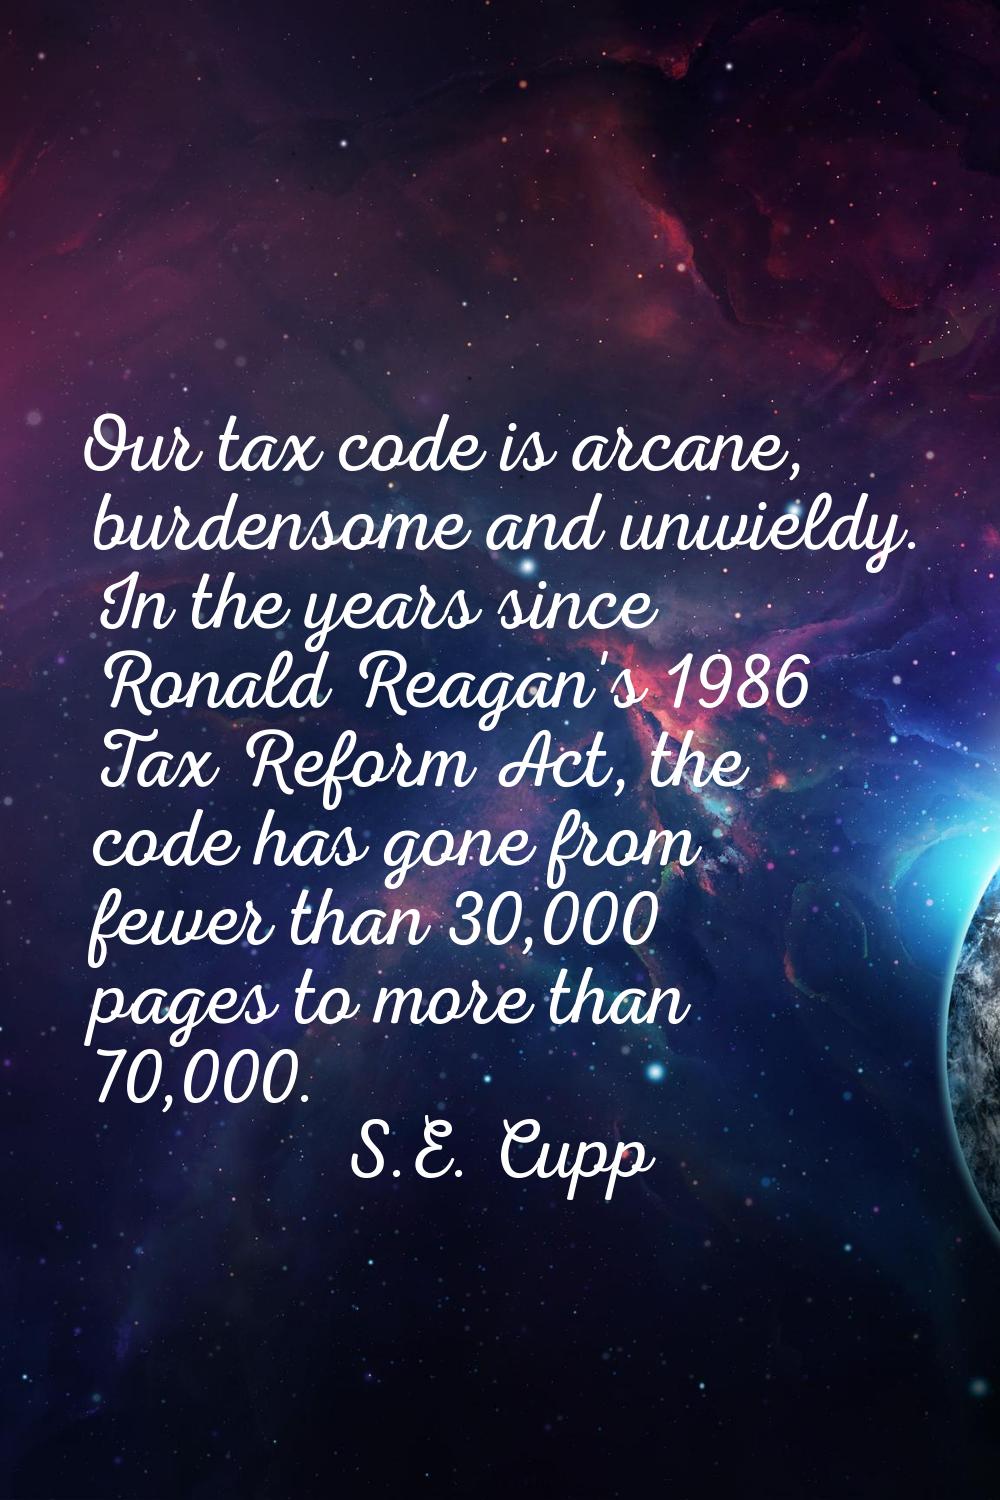 Our tax code is arcane, burdensome and unwieldy. In the years since Ronald Reagan's 1986 Tax Reform